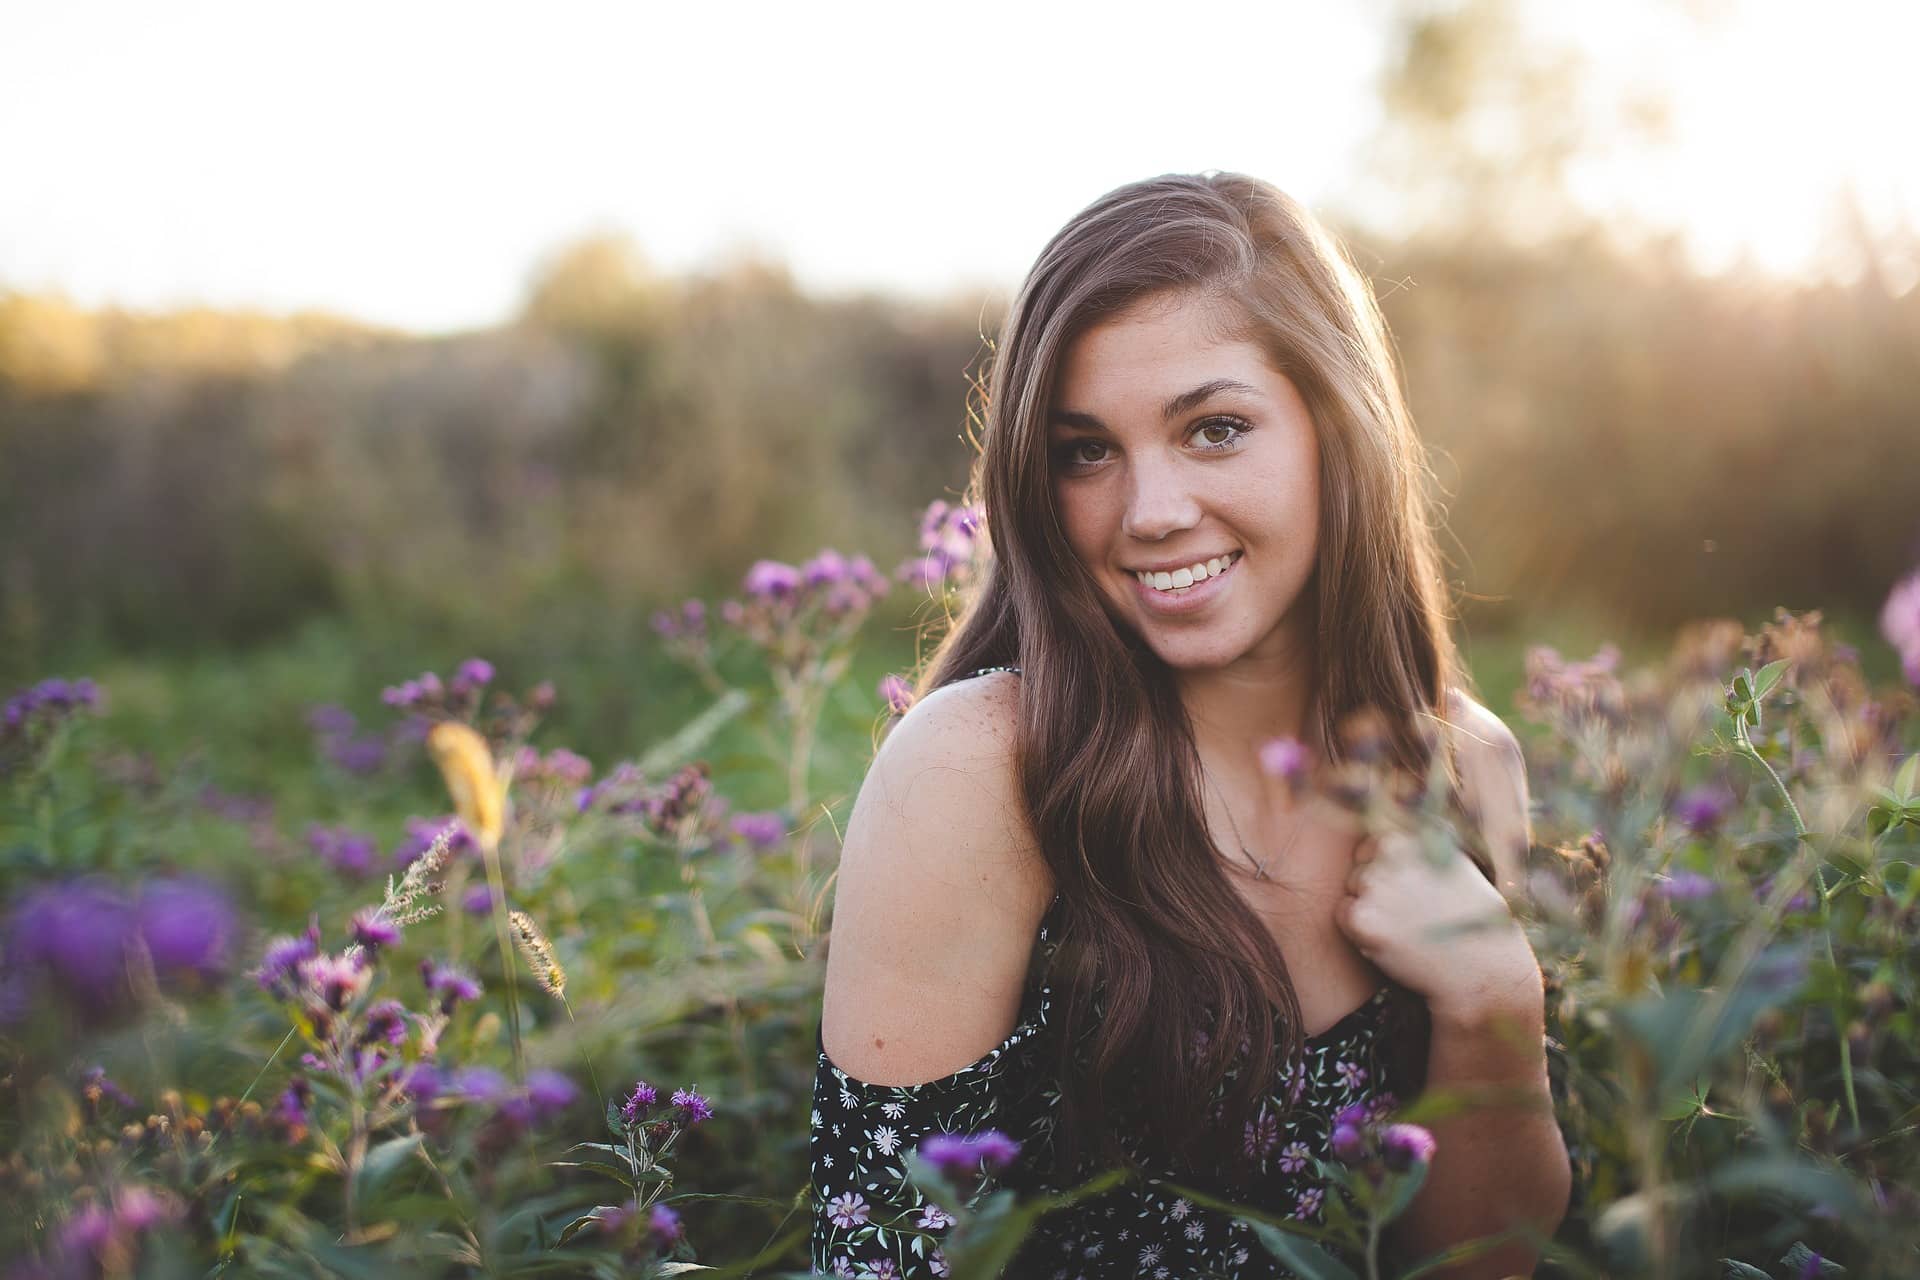 A girl smiles in a meadow of flowers.